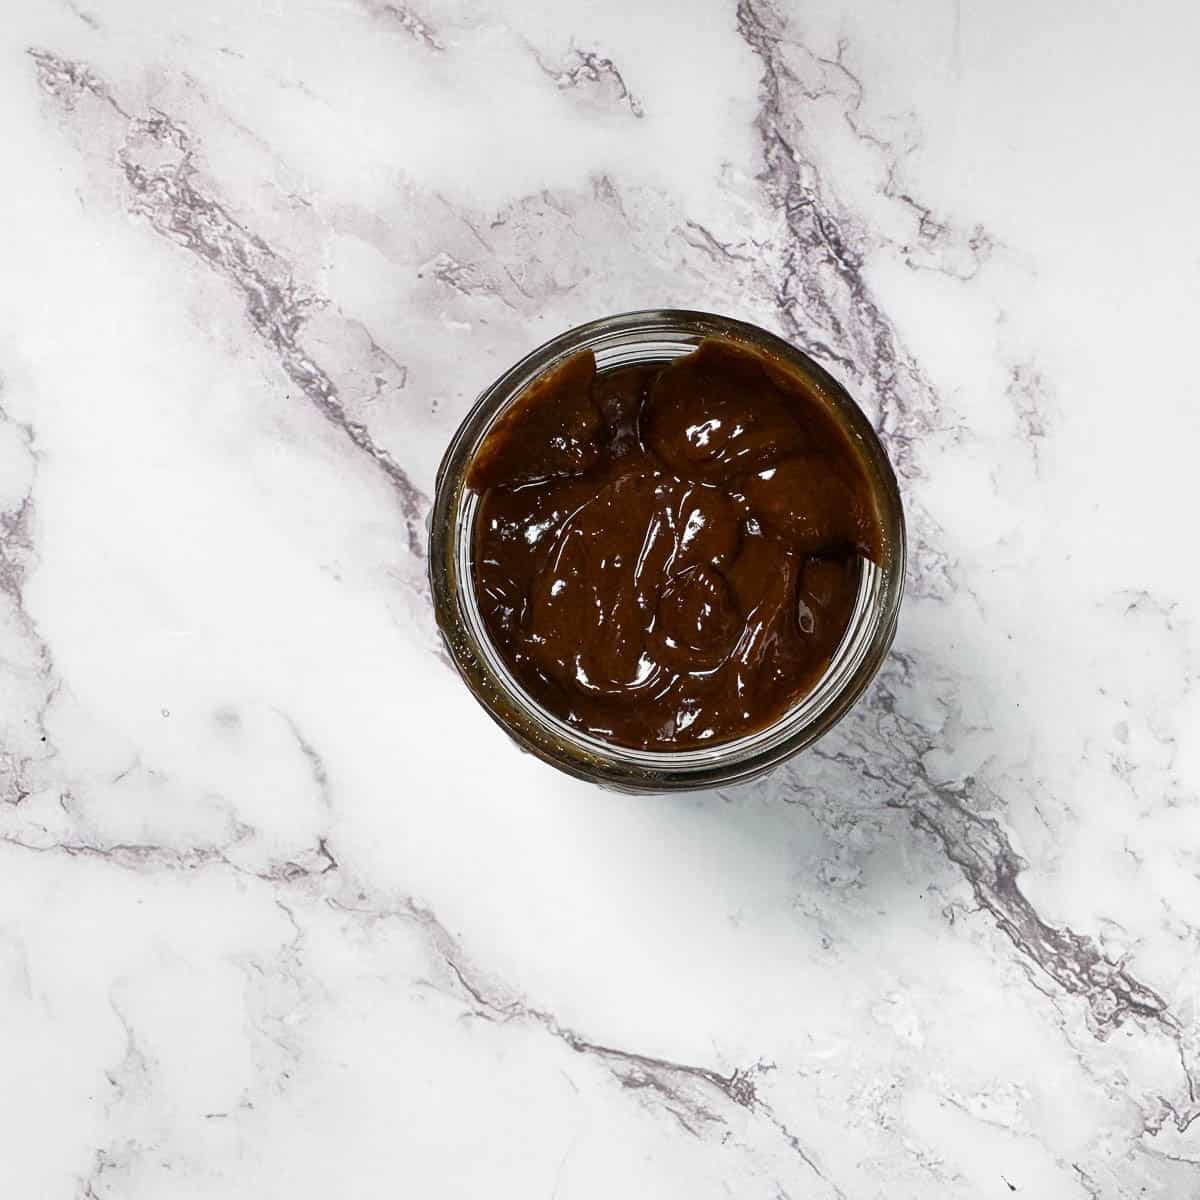 Hoisin sauce in jar on the white marble background.